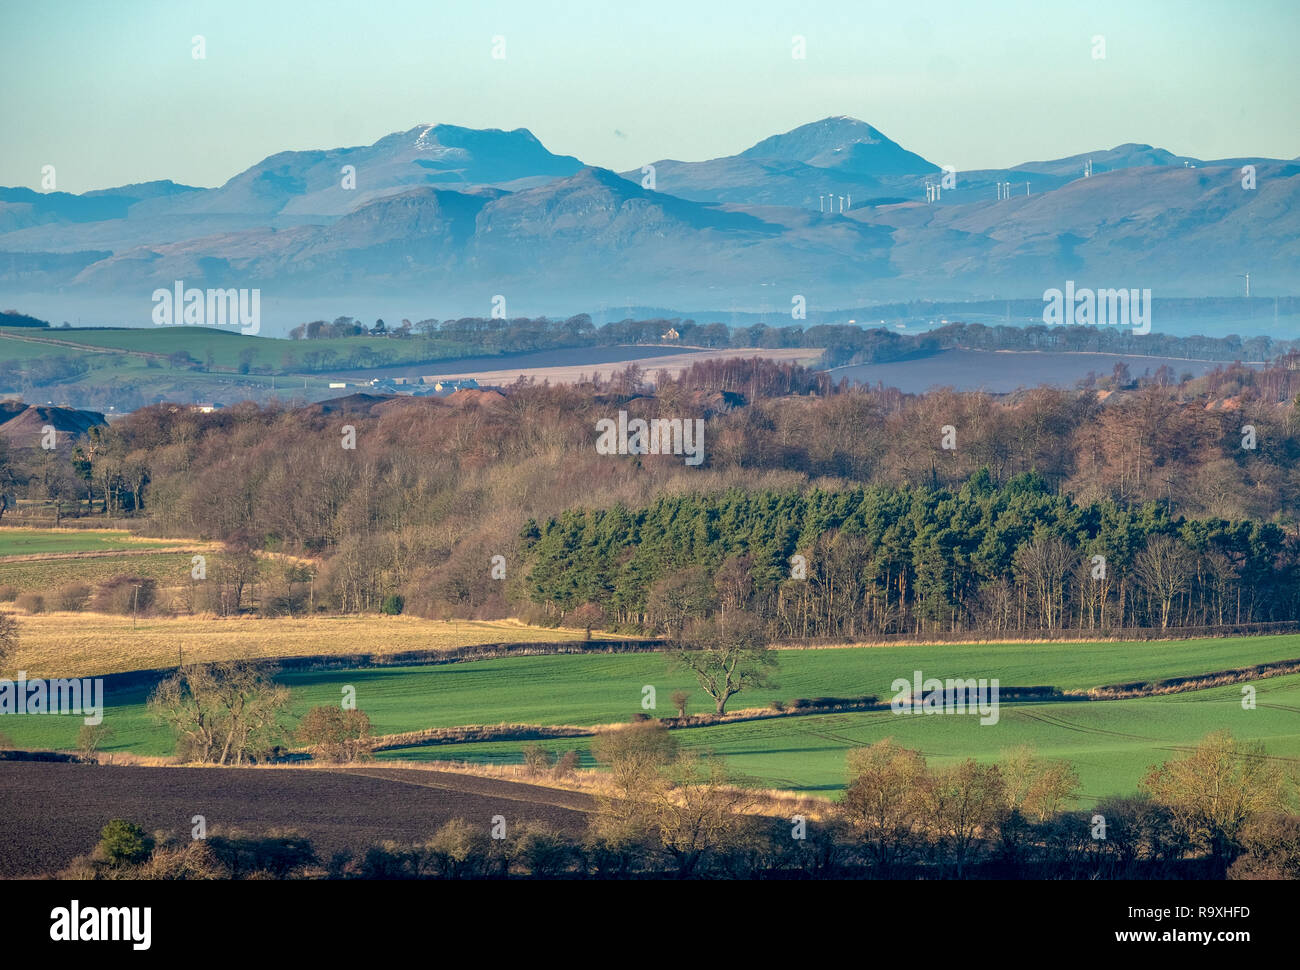 A view of farmland near Broxburn, West Lothian looking towards the Ochil hills and the mountains of Stuc a Chroin and Ben Vorlich in distance. Stock Photo